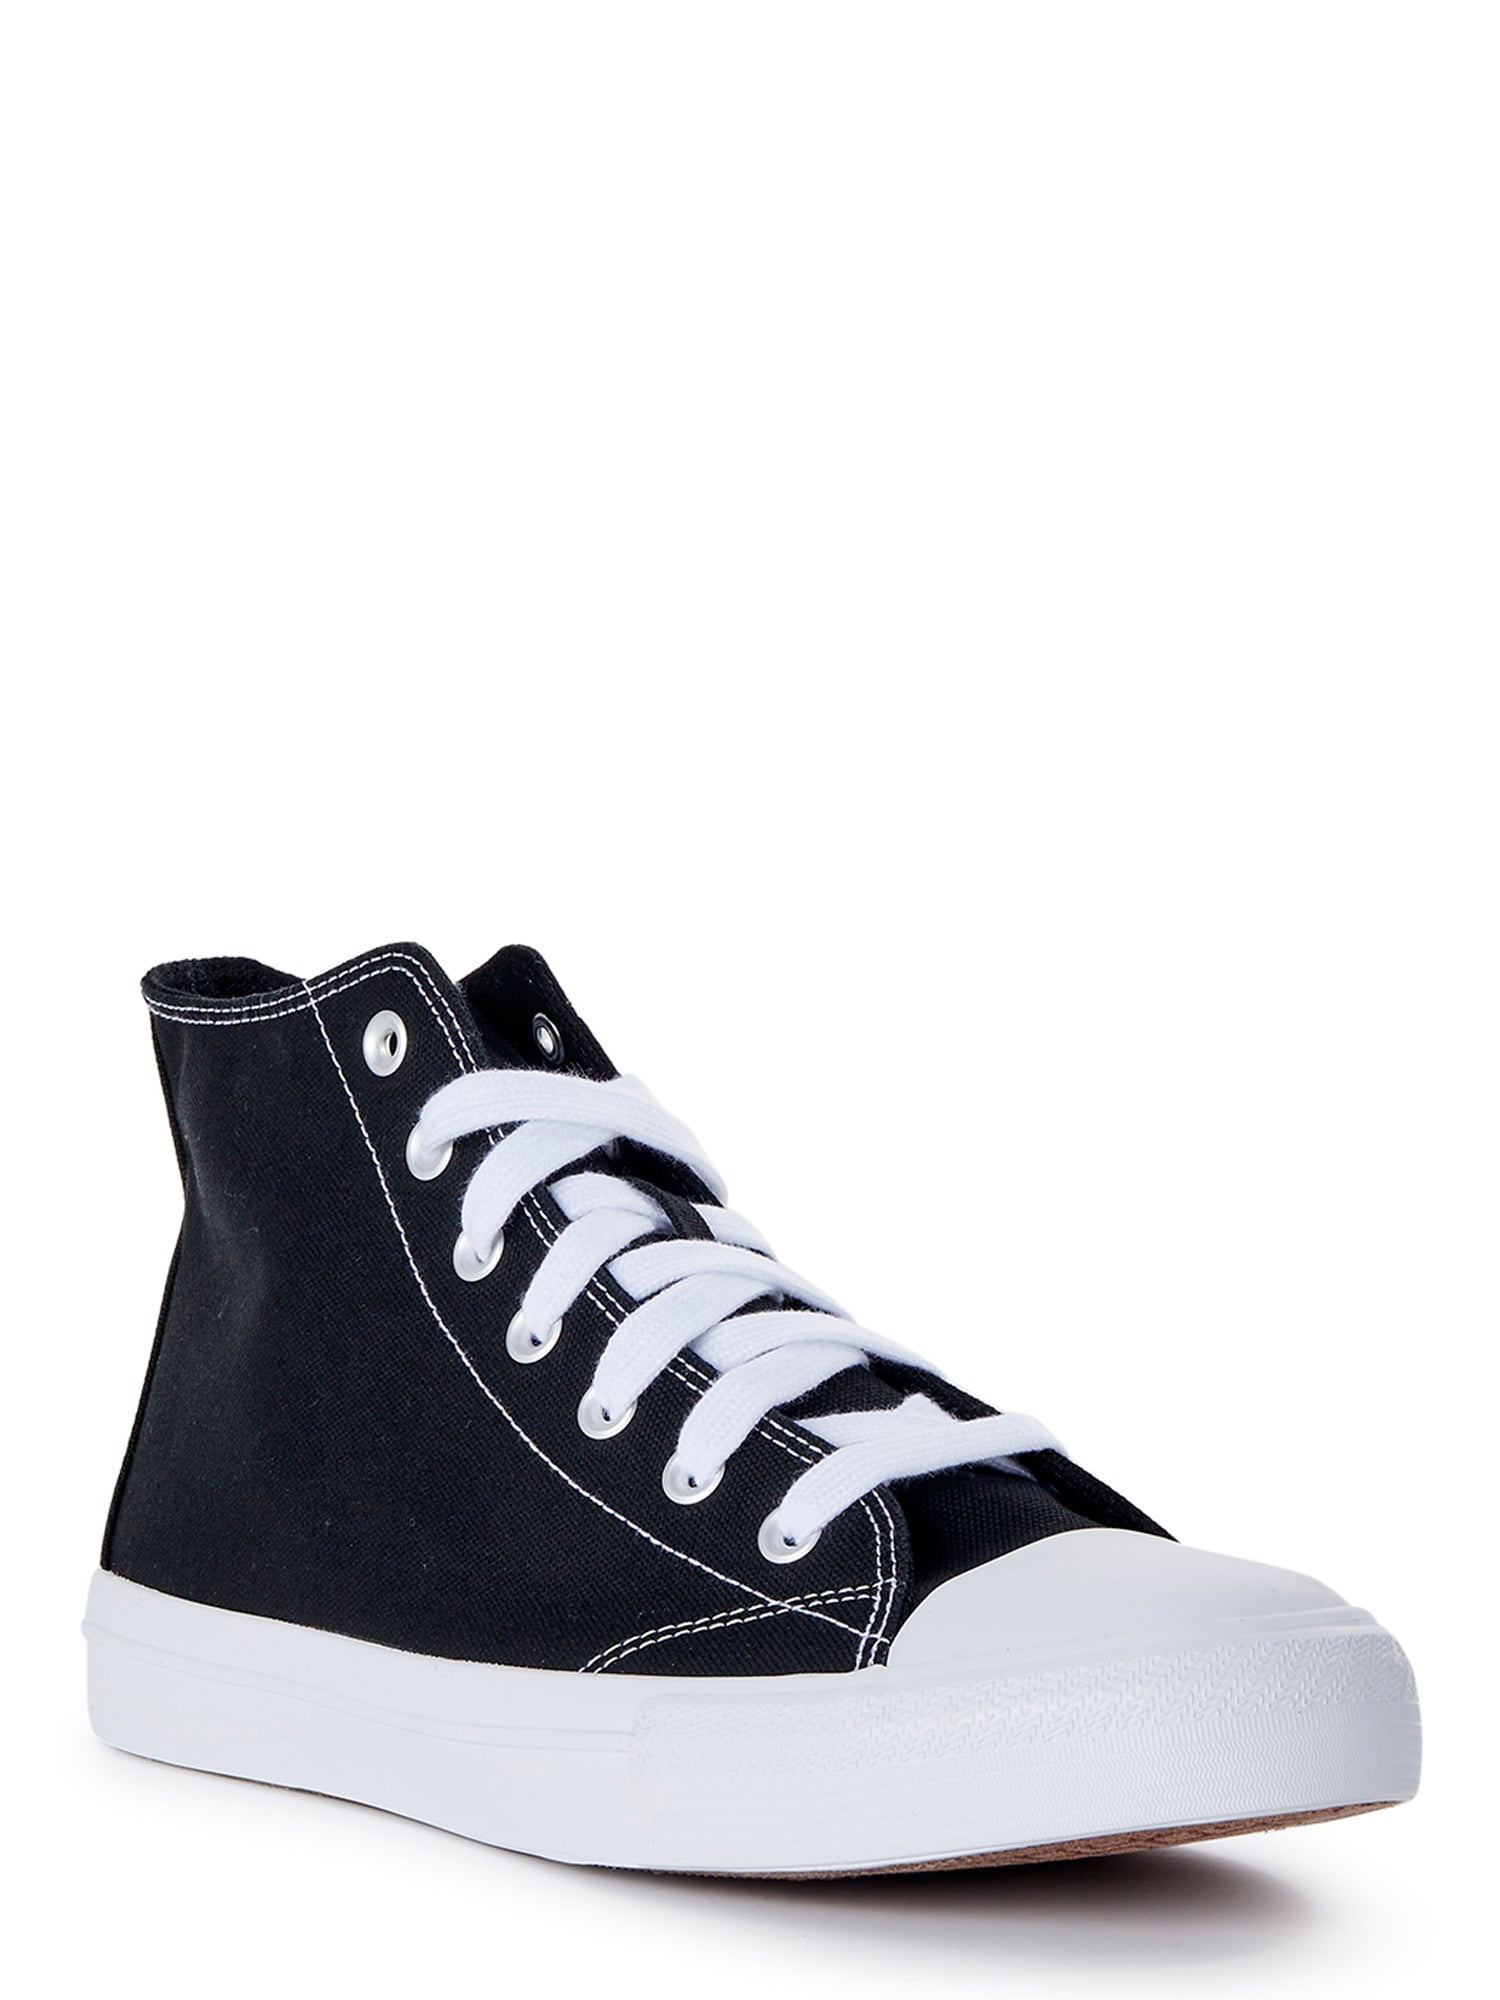 No Boundaries Men's High Top Canvas Lace up Sneakers